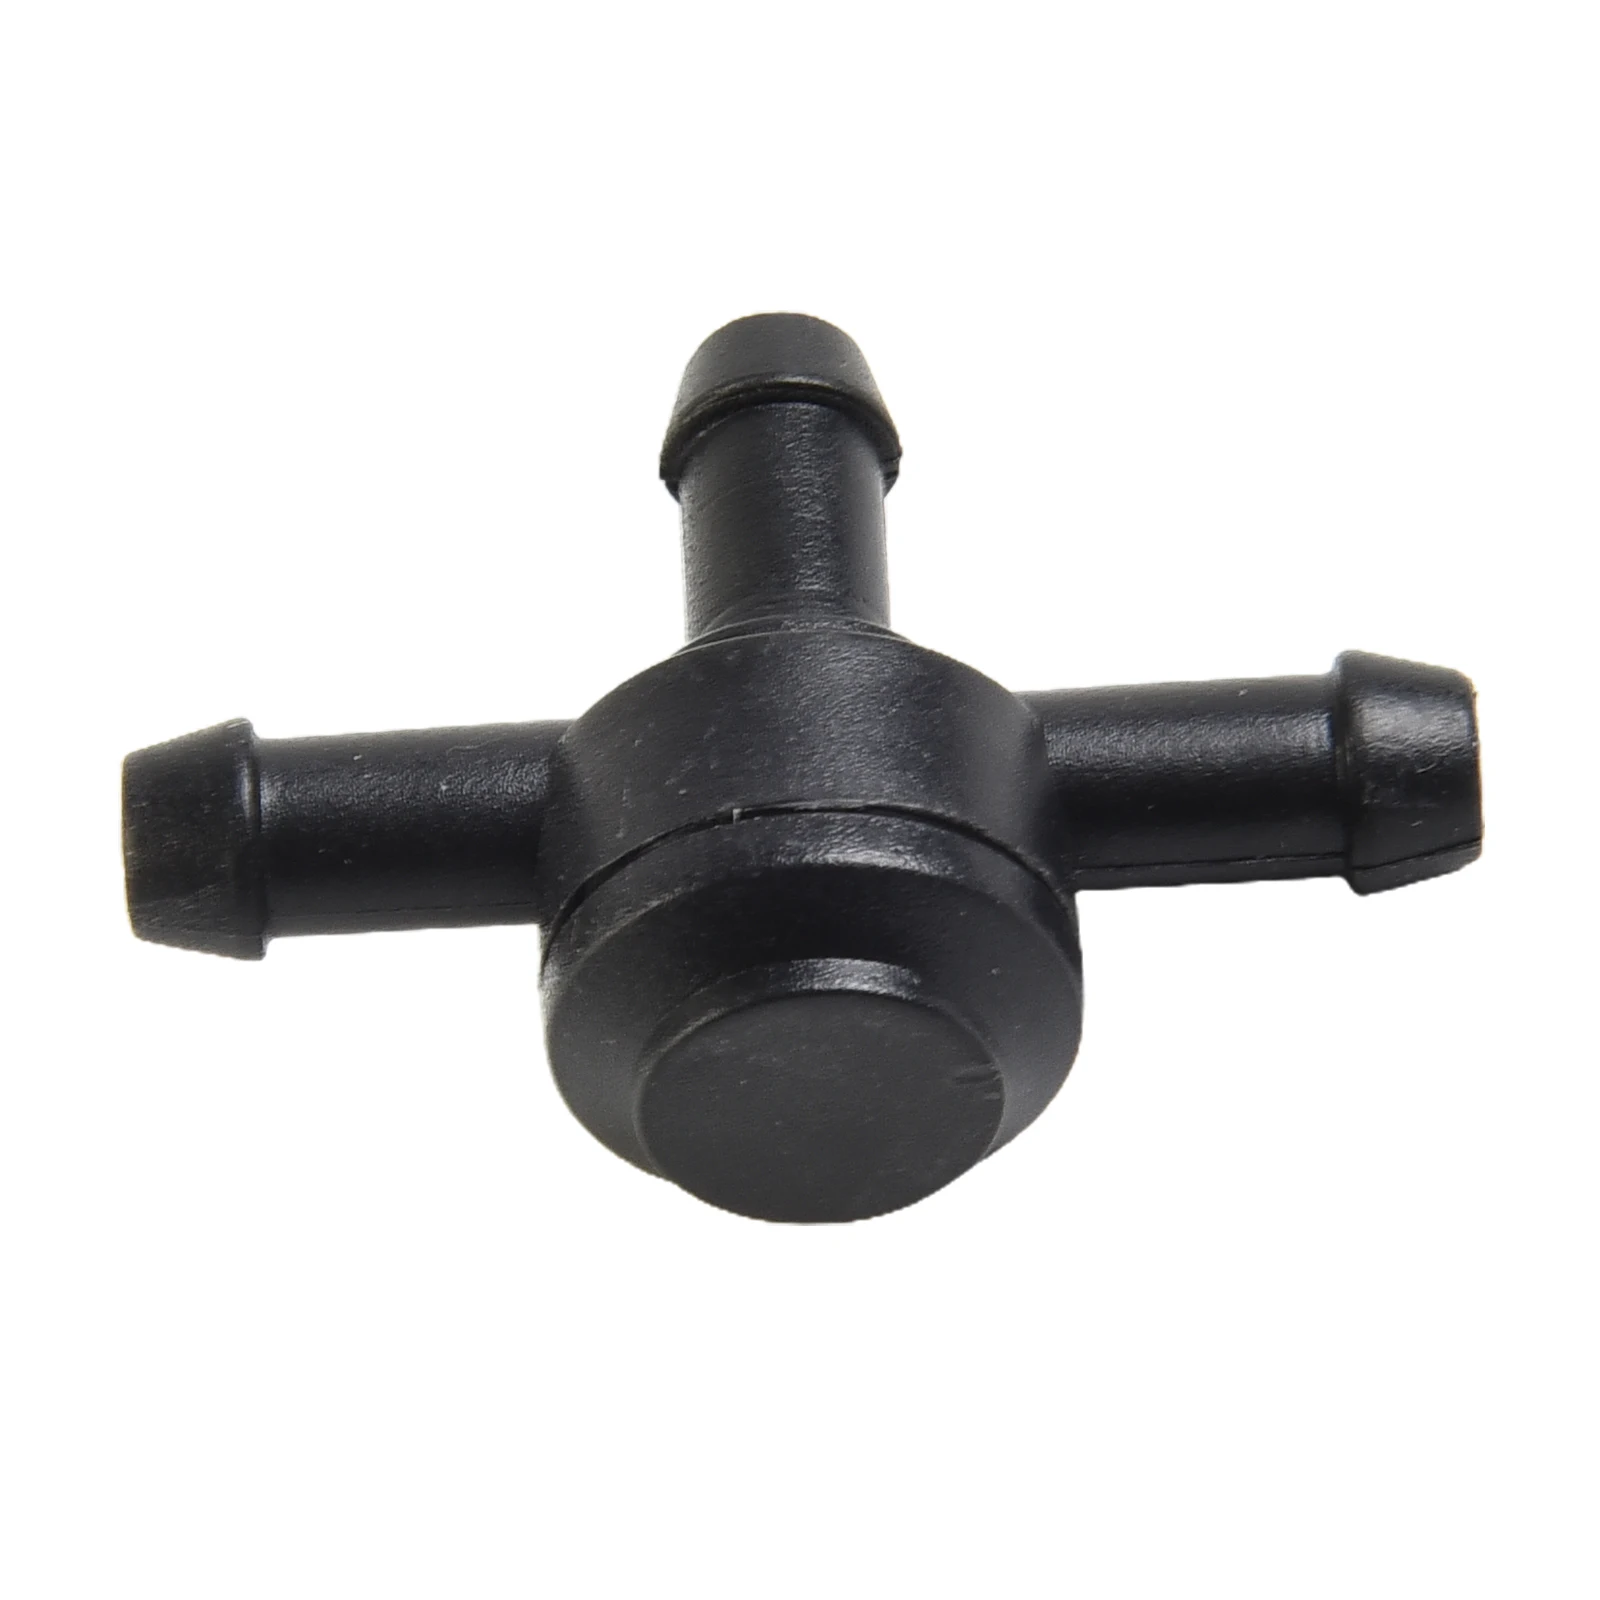 Windscreen Washer Valves Replacement for Volvo C30 S40 V50 Car Accessories - £11.11 GBP